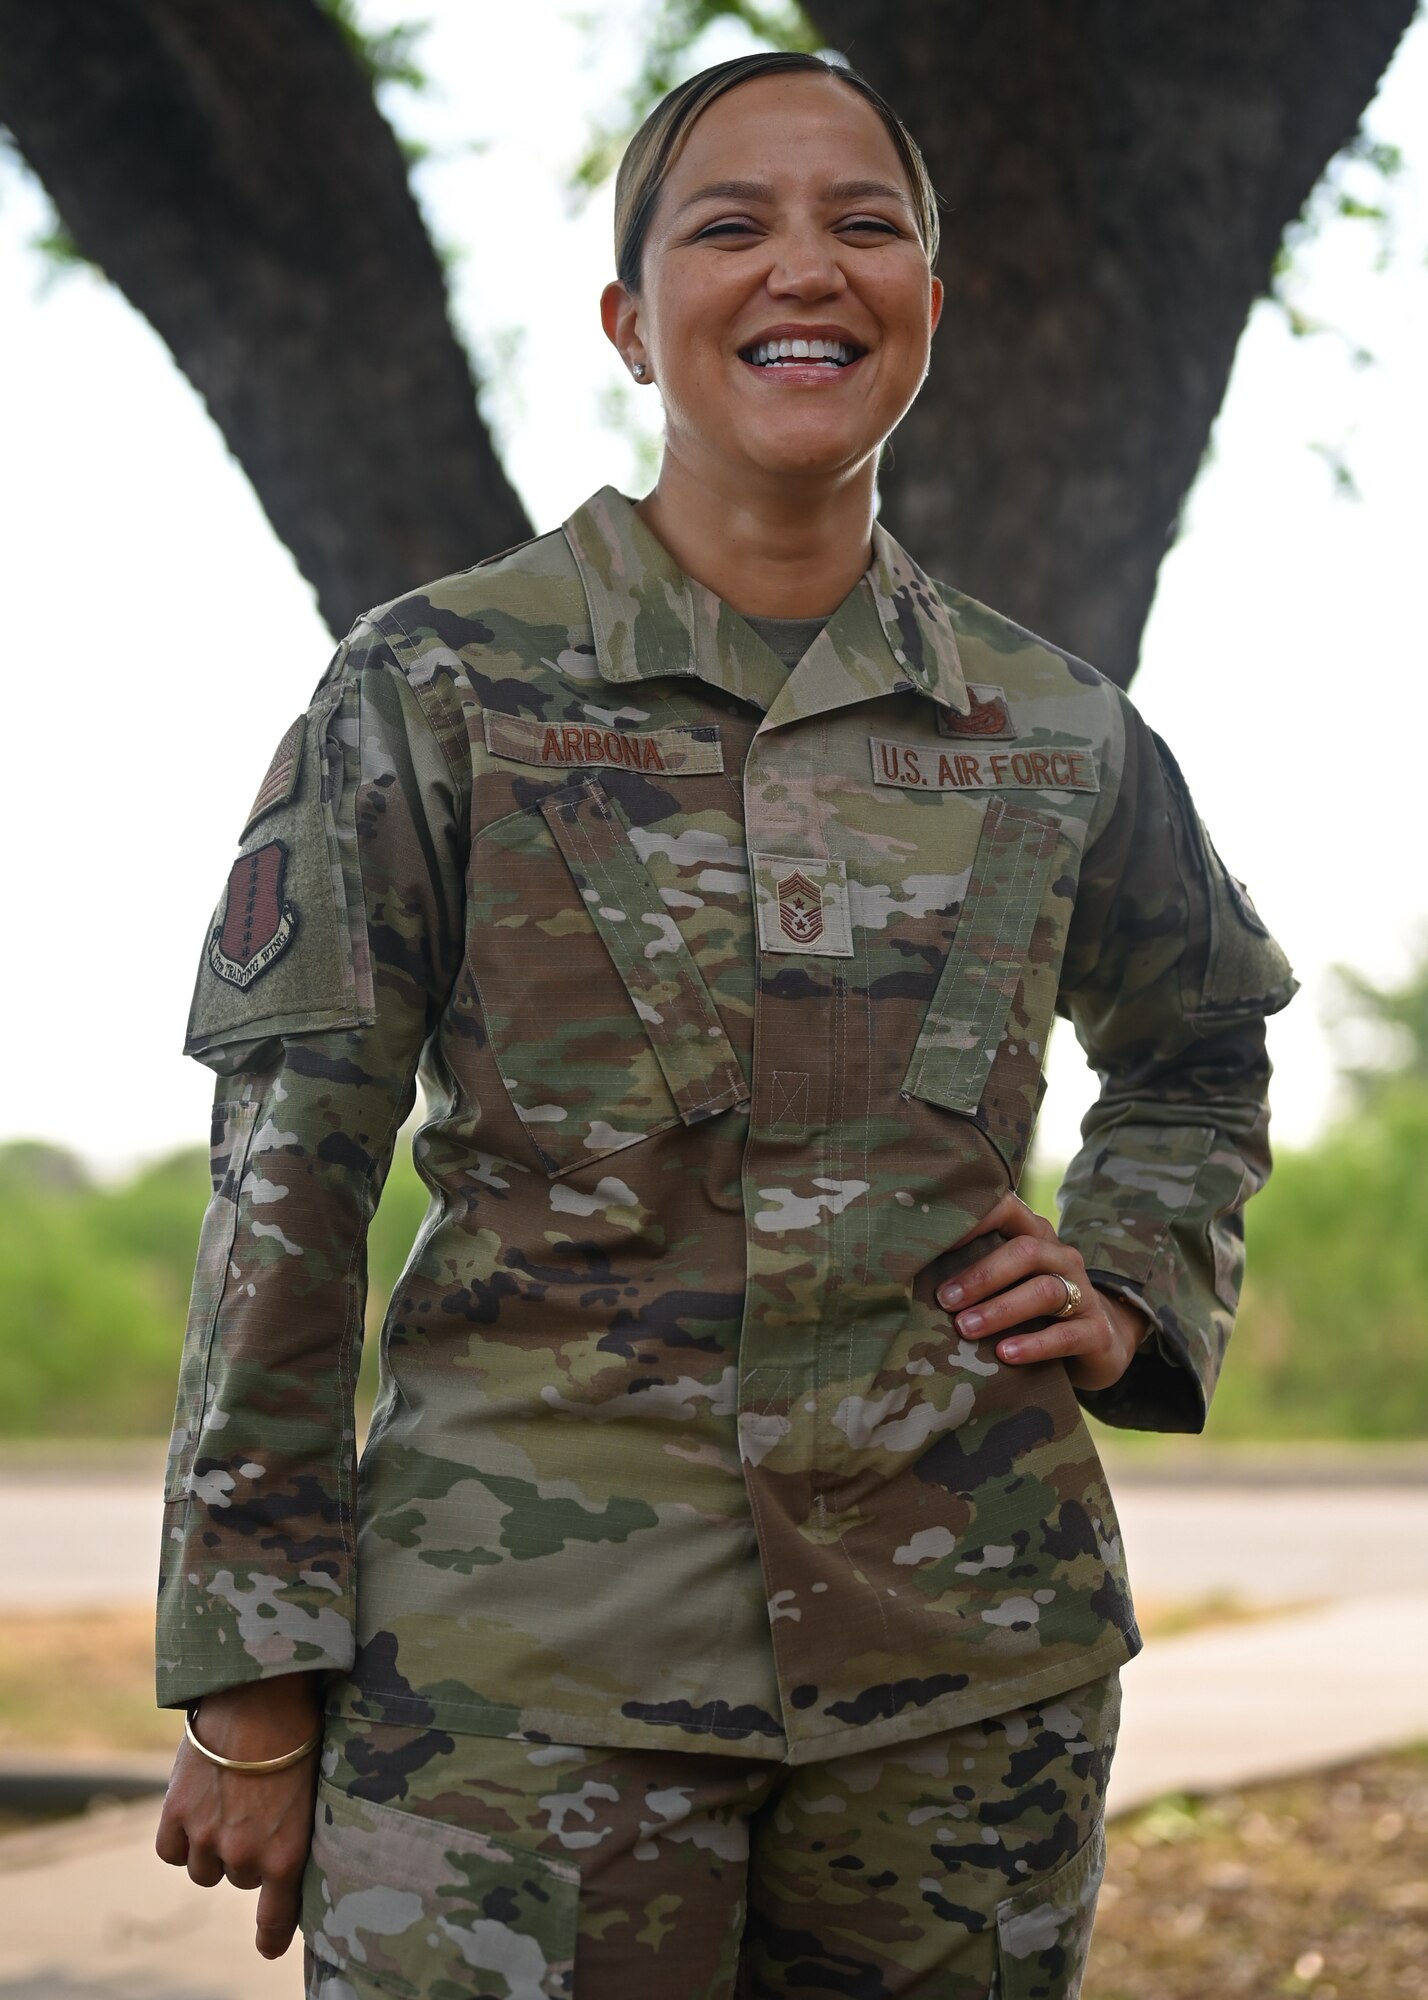 U.S. Air Force Chief Master Sgt. Rebecca Arbona, 17th Training Wing command chief, poses for a photo for Asian American and Pacific Islander Heritage Month at Goodfellow Air Force Base, Texas, May 13, 2022. Arbona was proud to represent her Filipino heritage during AAPI Heritage Month. (U.S. Air Force photo by Senior Airman Ethan Sherwood)